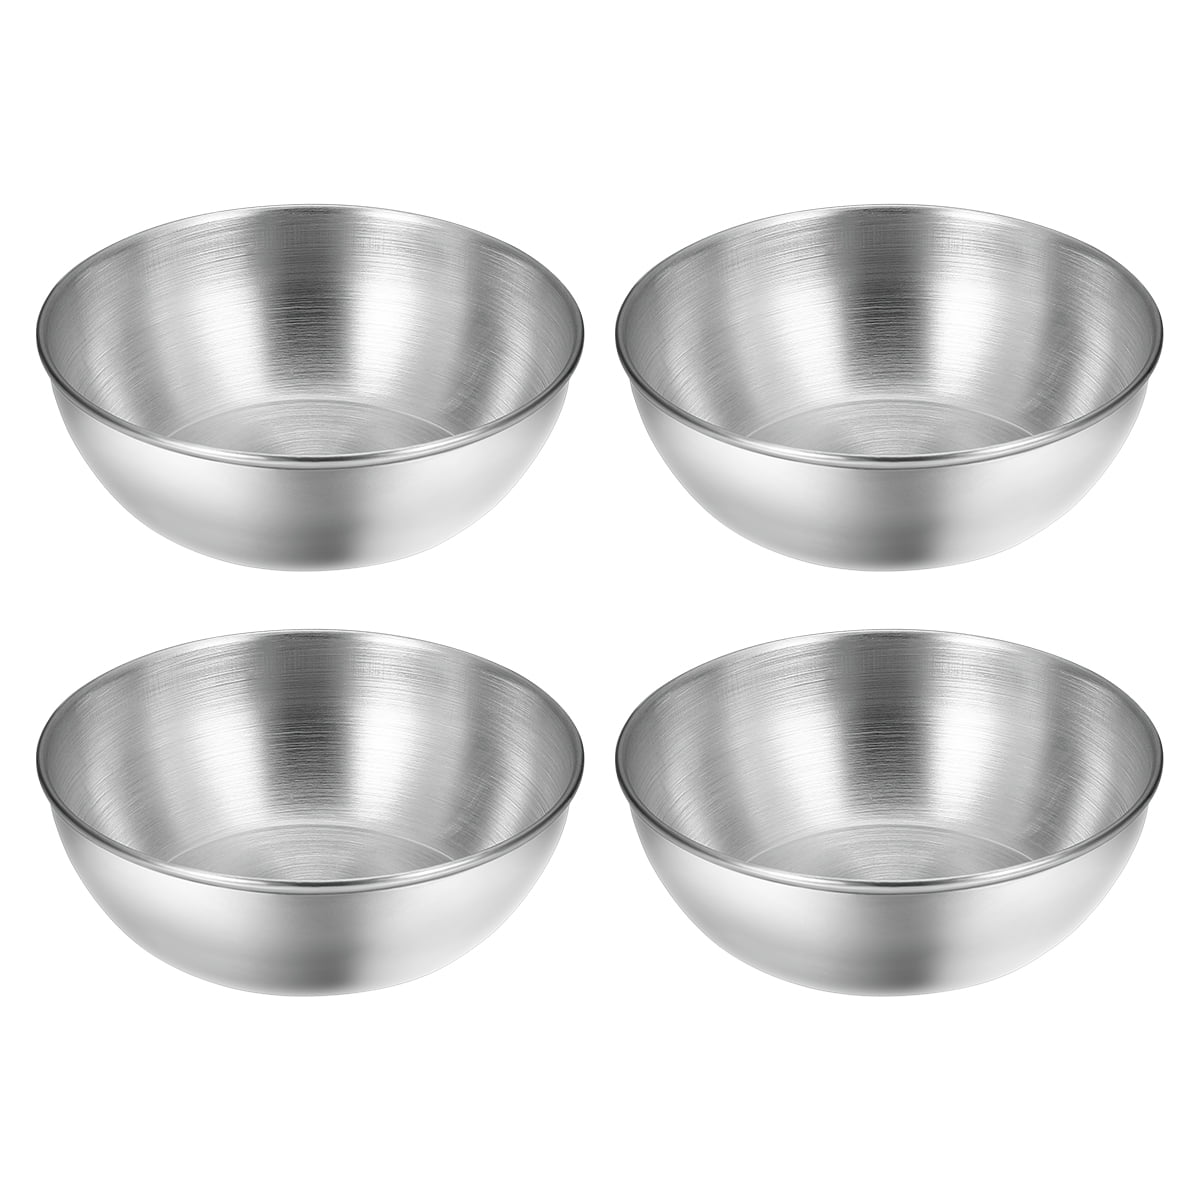 8pcs Round Sauce Dishes Appetizer Plates Food Dipping Bowls Saucer for Home Bar